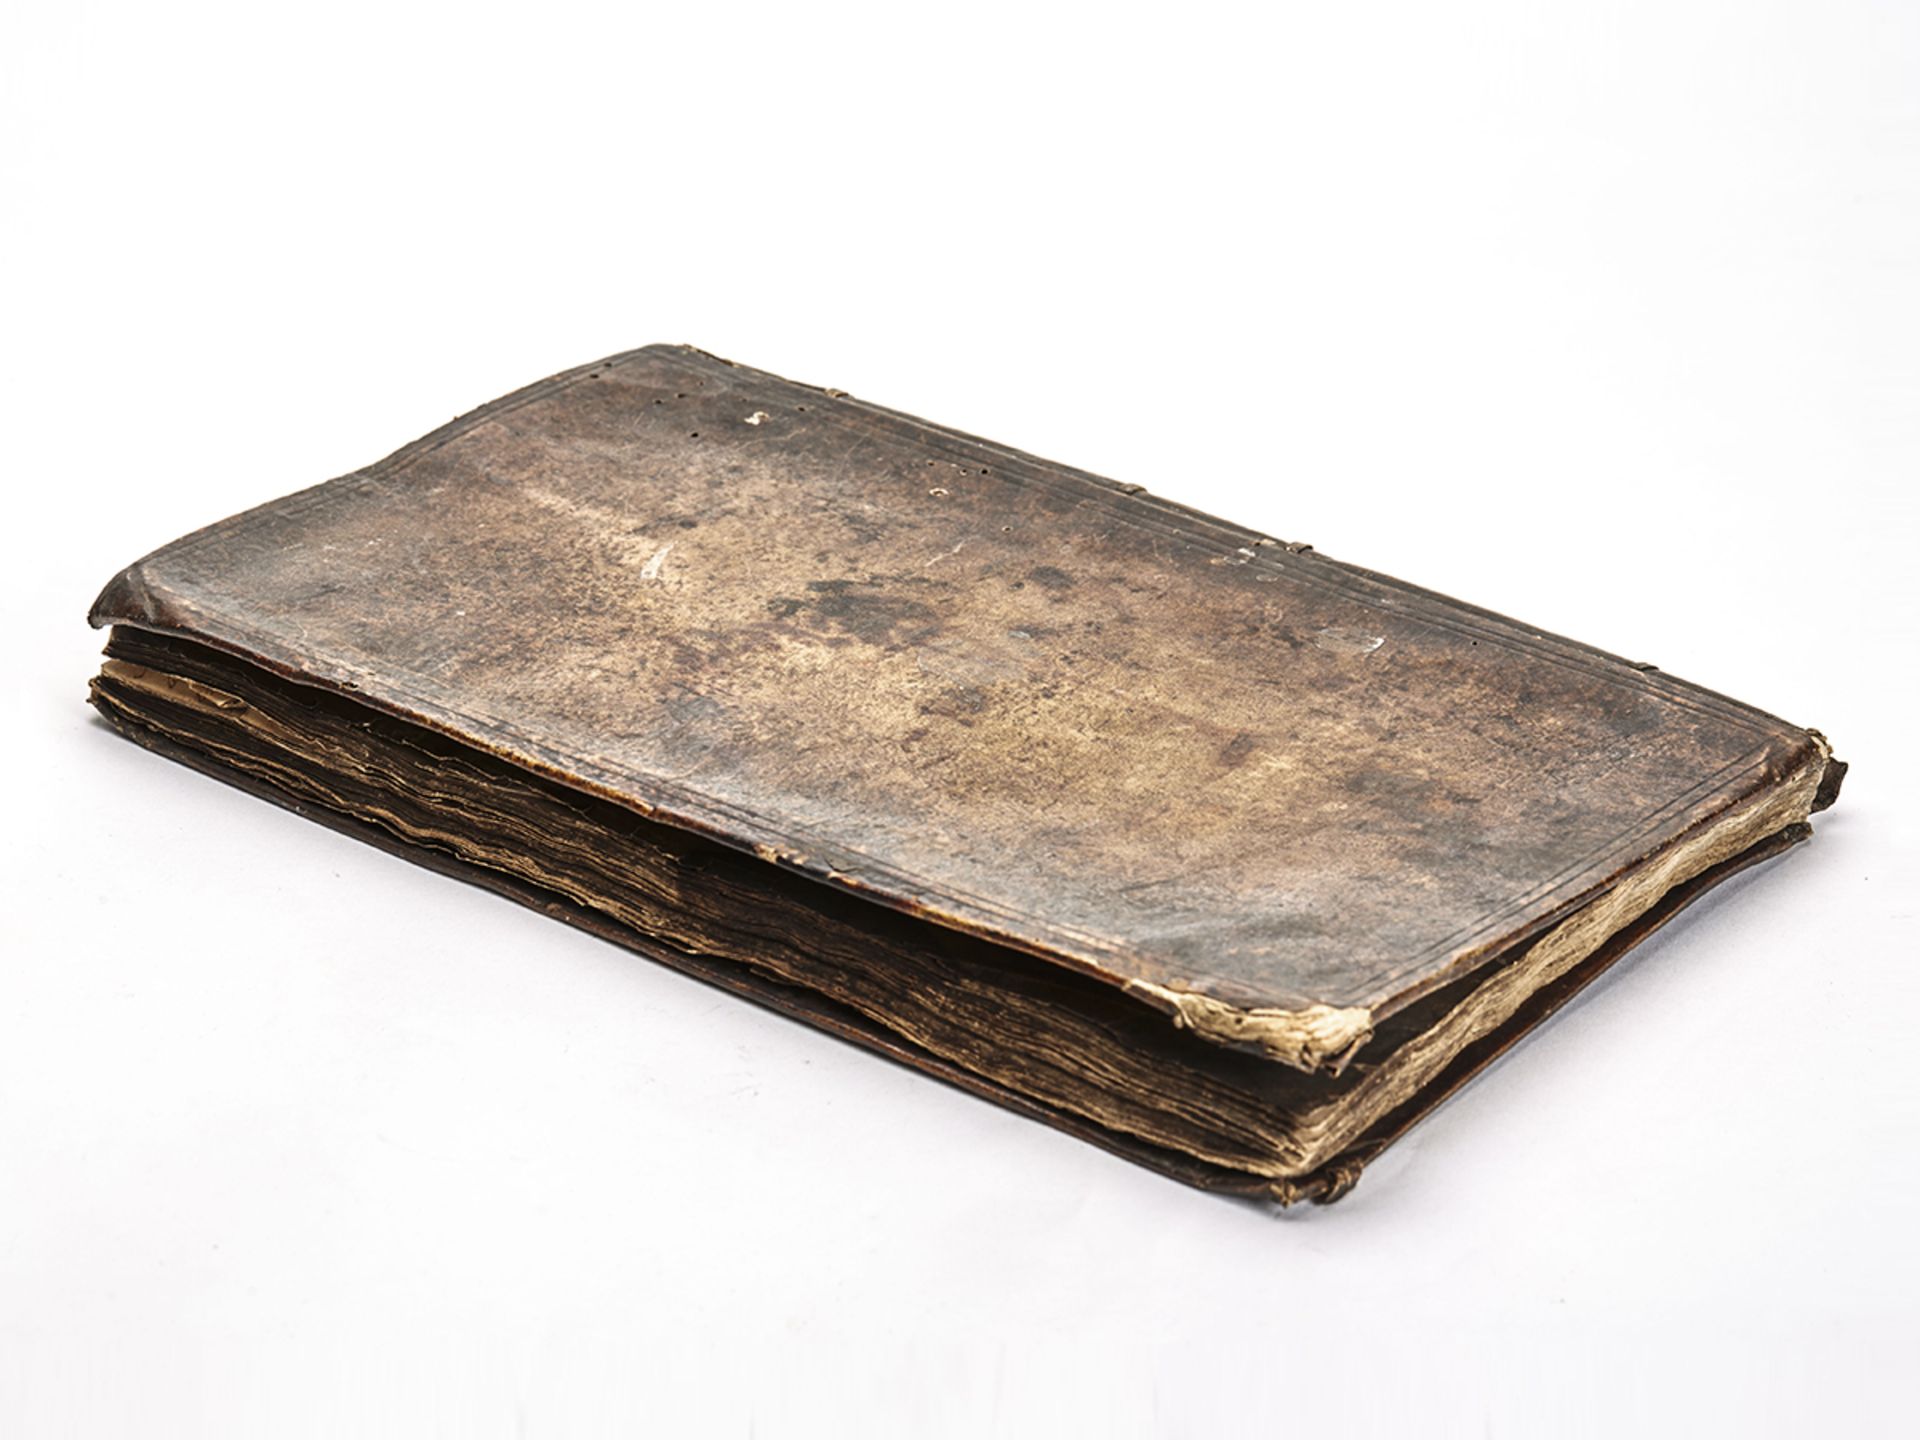 RARE LEATHER BOUND NAVAL SHIPS LOG BY JOHN BAGGALEY c.1769 ***Reserve Lowered 12:10 - 28.2.17** - Image 11 of 12